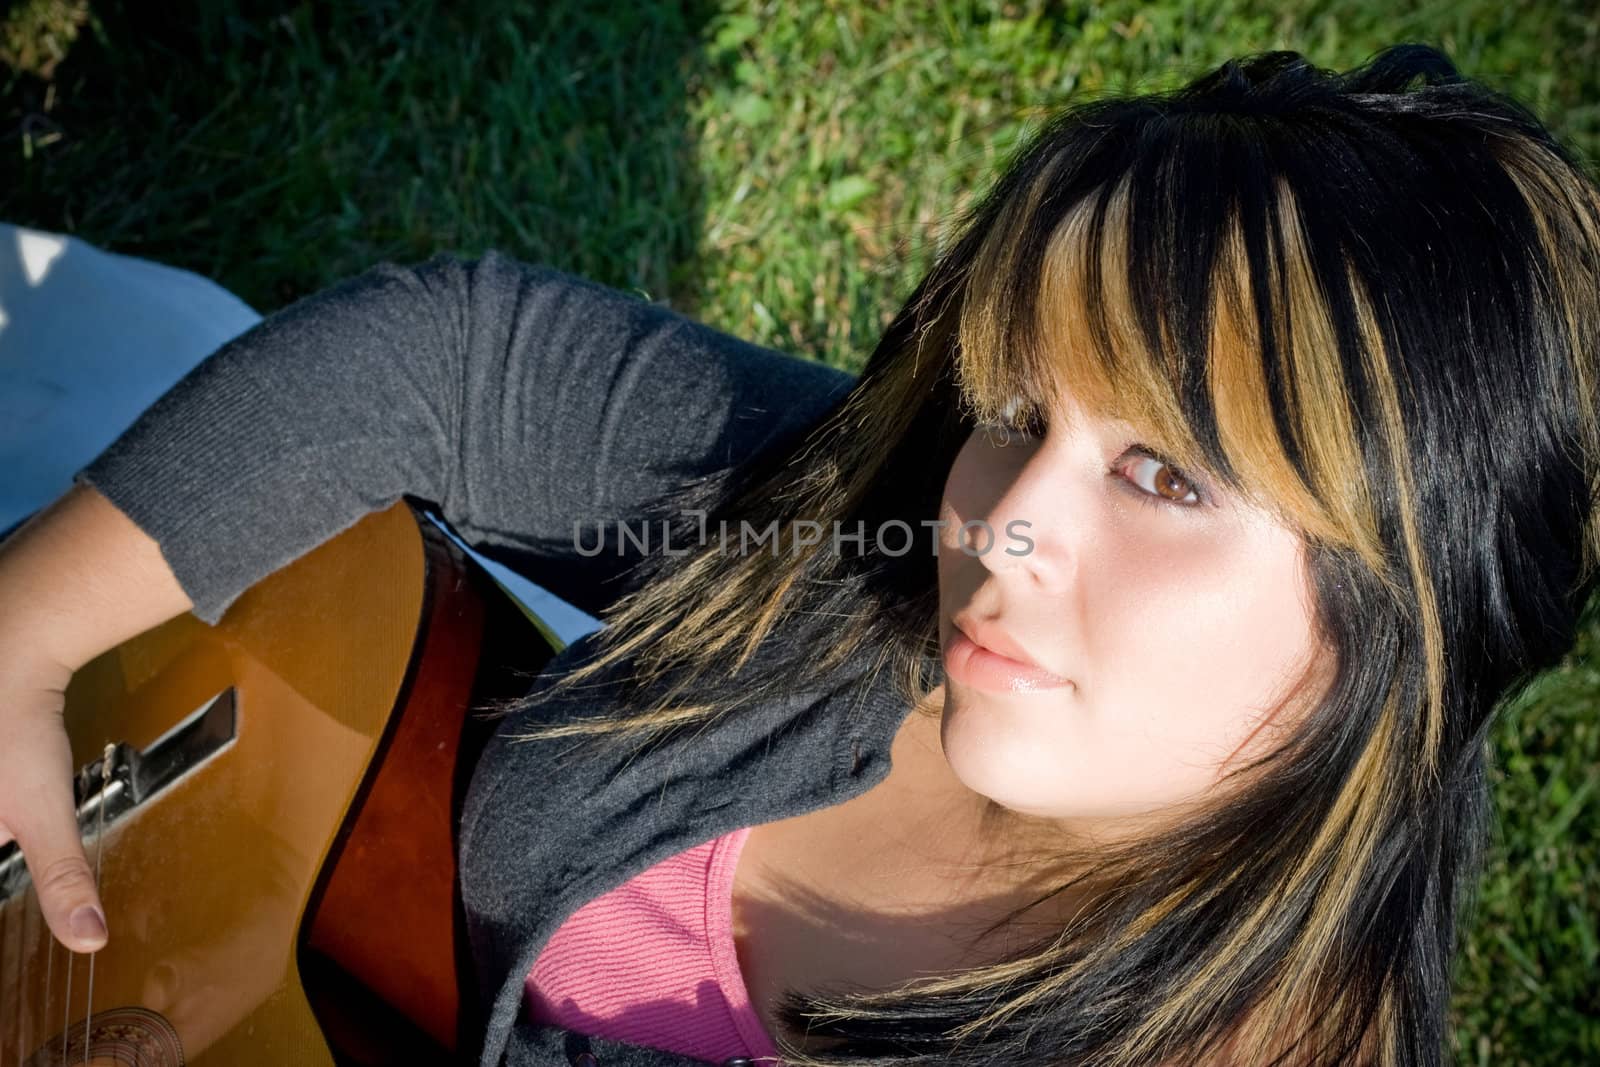 A young hispanic woman playing a guitar while laying on a blanket in the green grass.  Her hair is highlighted with blonde streaks.